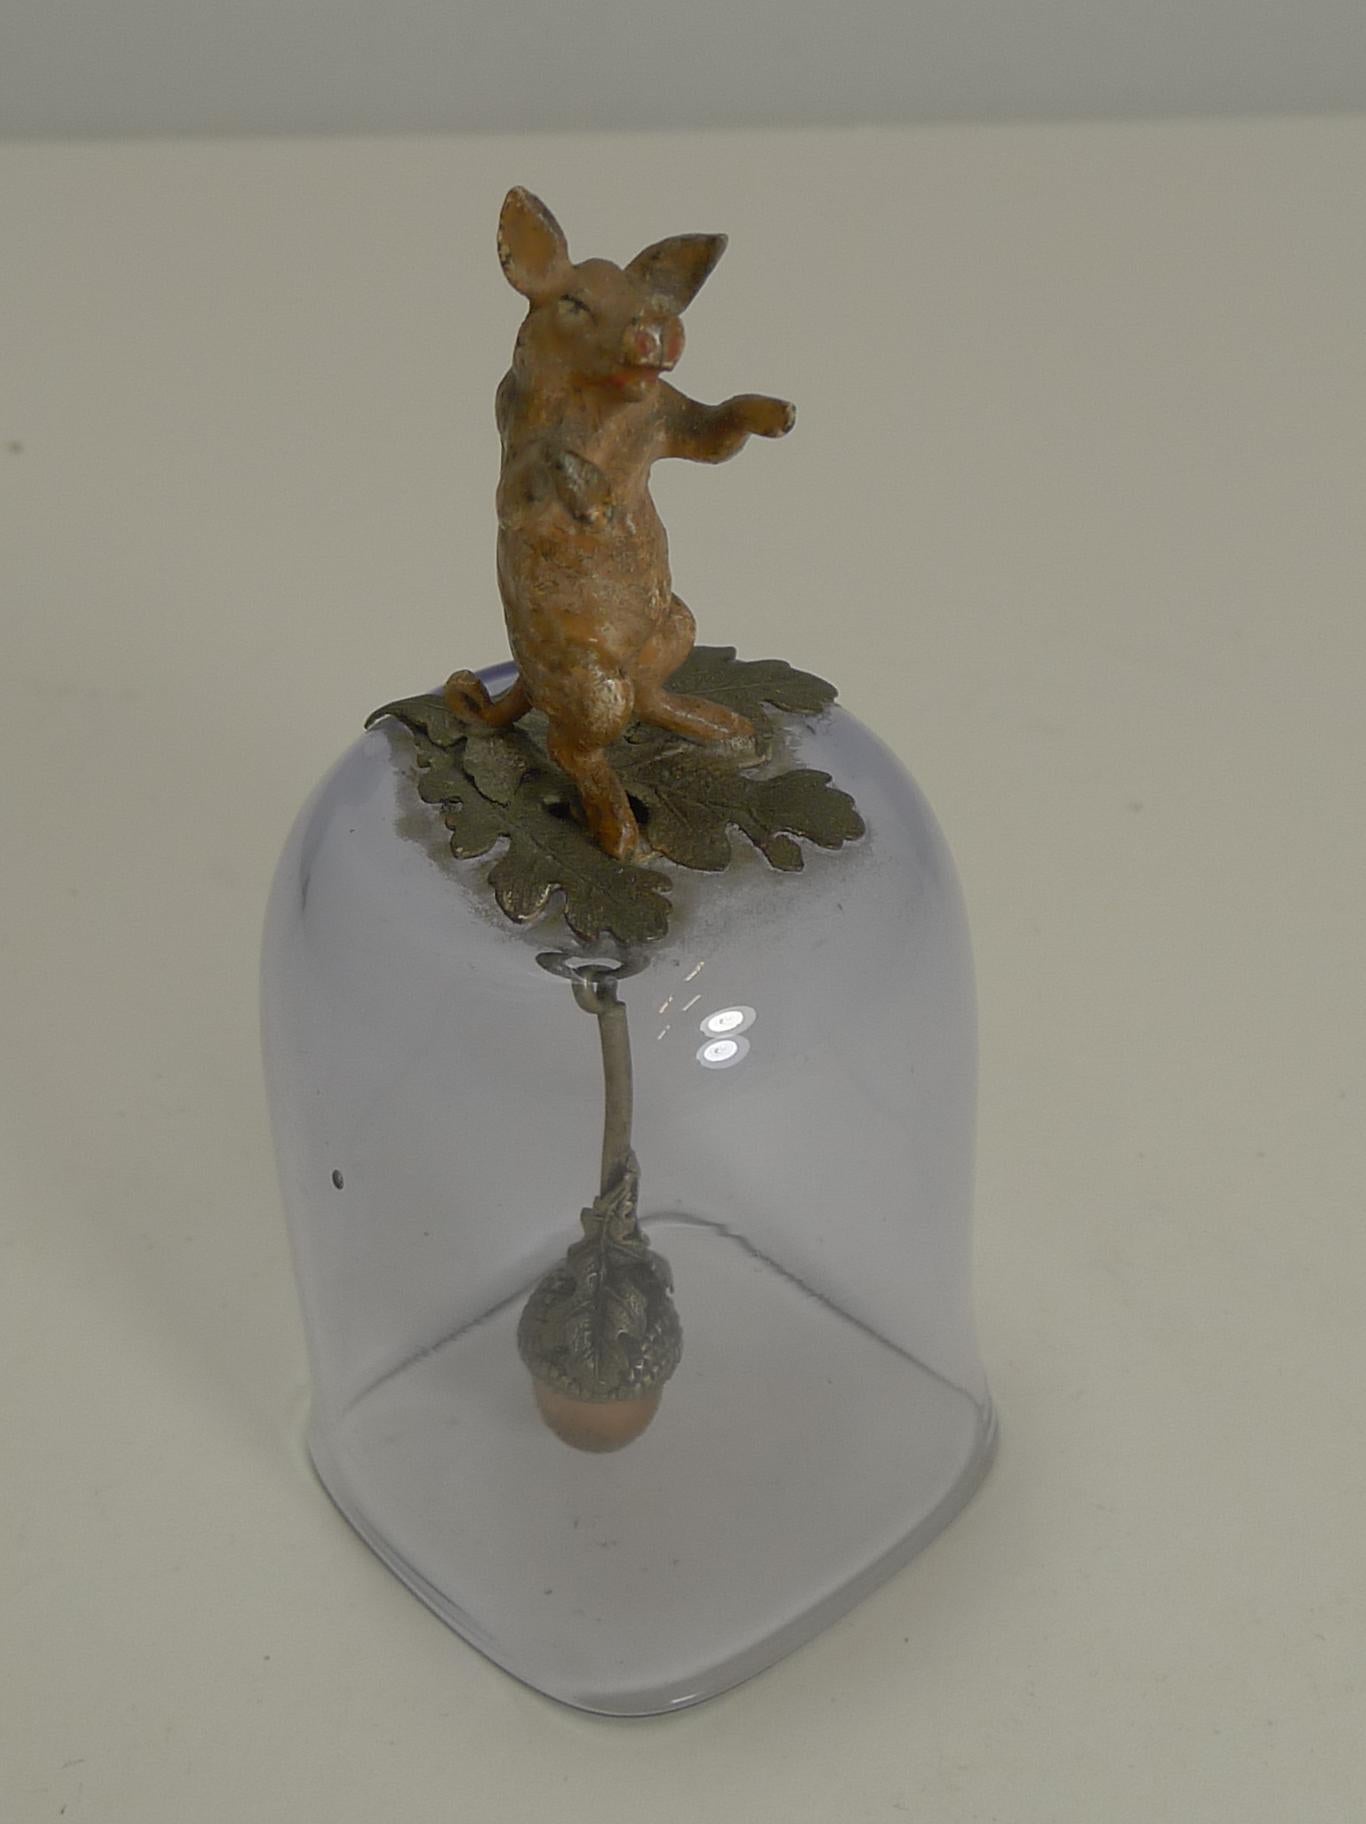 A highly collectable antique bell, a rare find and in perfect condition. The glass is a very pale amethyst color and i topped with the most charming cast cold painted bronze figure in the form of a pig standing on an Oak leaf base.

The charm